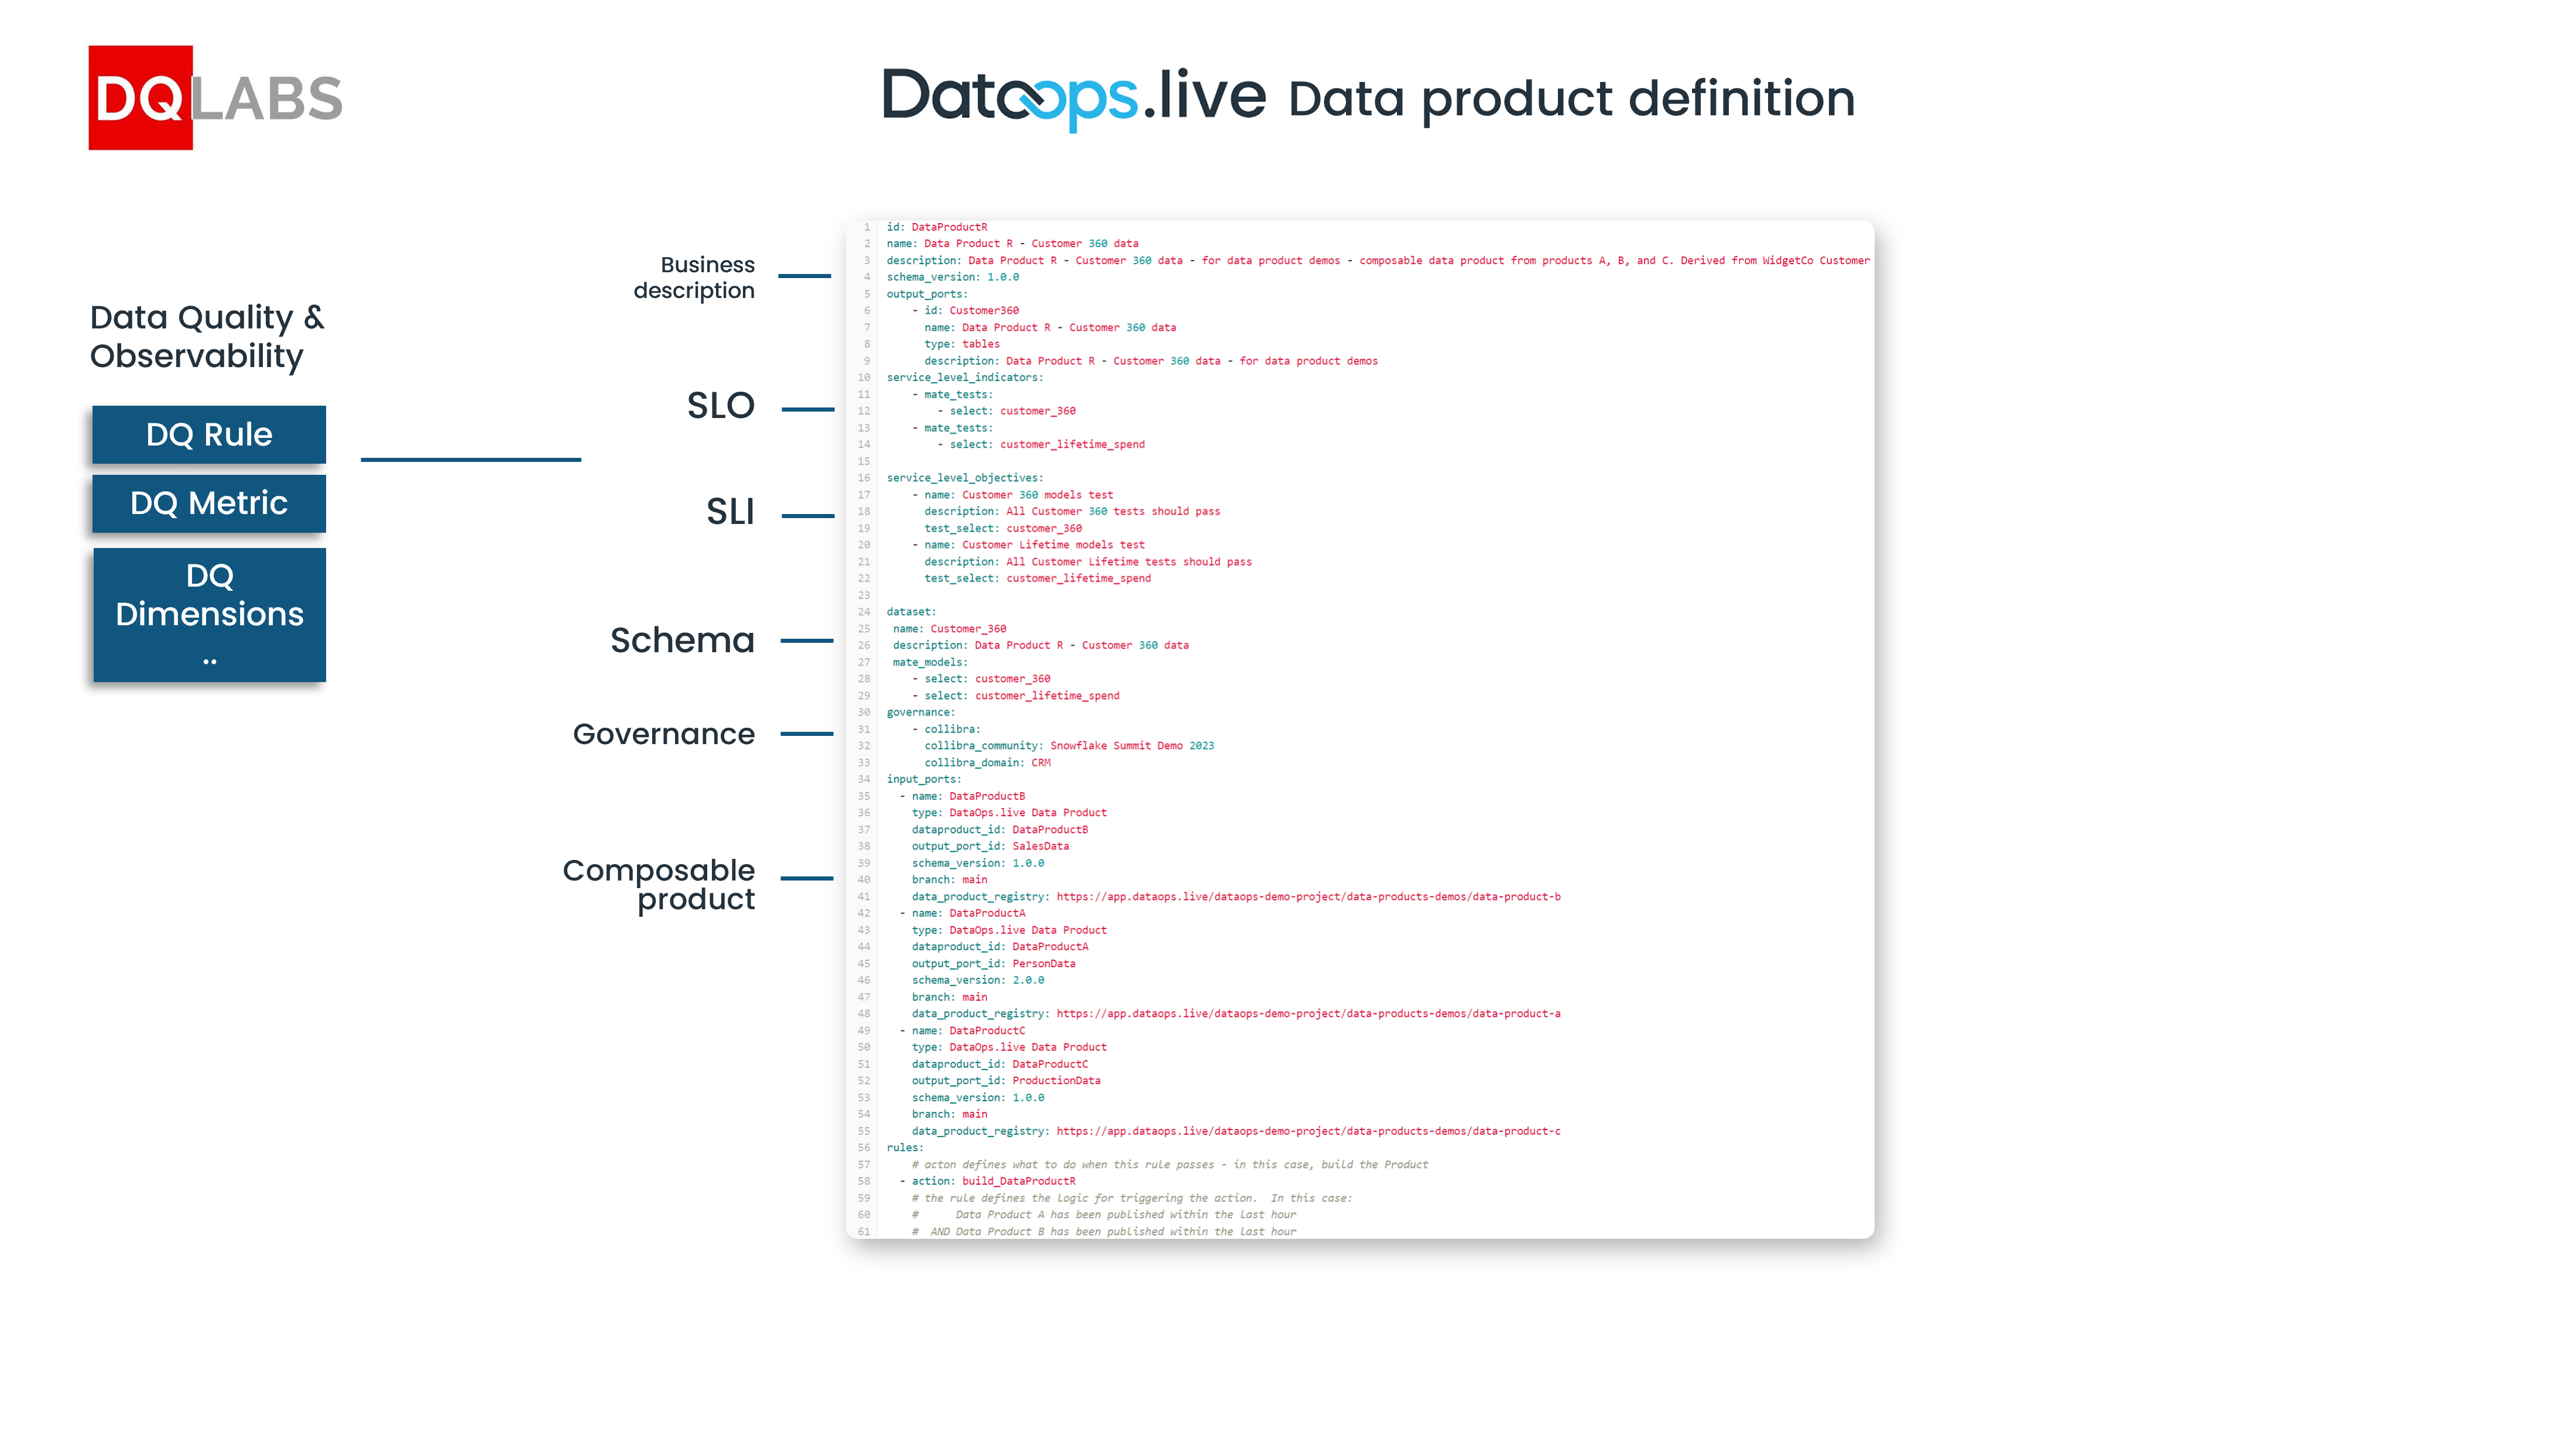 DQ Labs and DataOps.live - Data Product definition-3